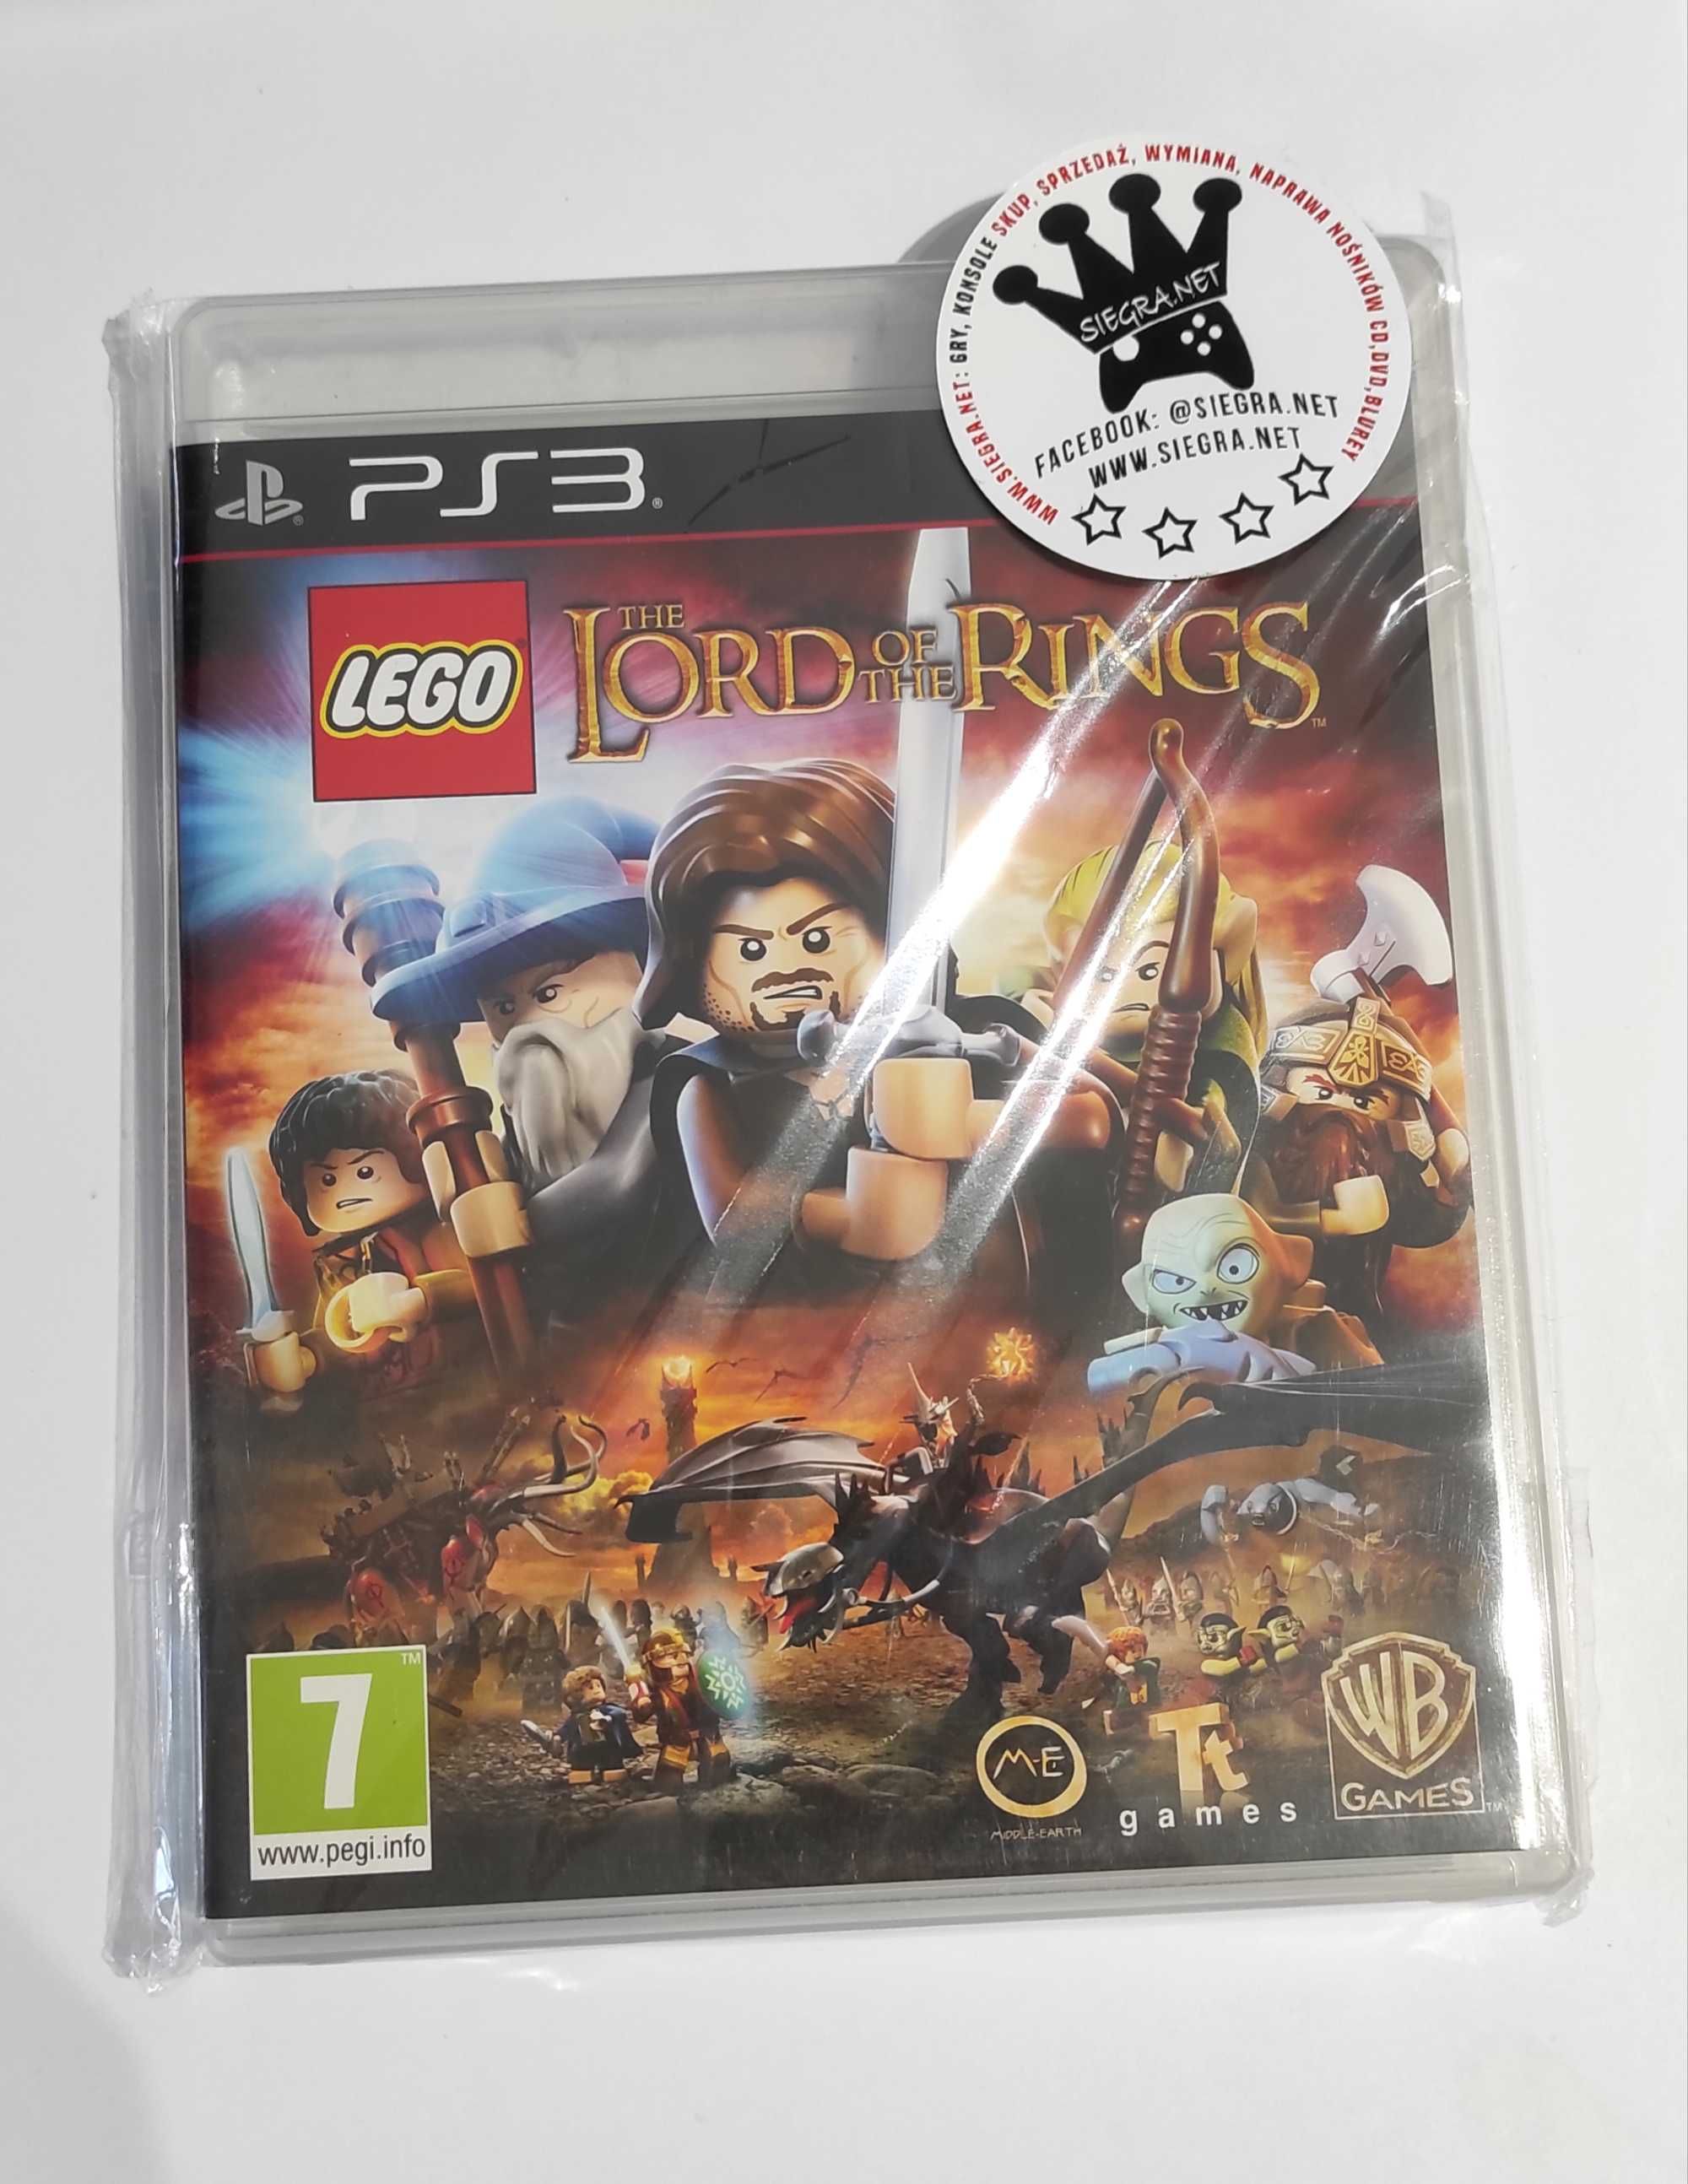 Lego Lord of Rings Ps3